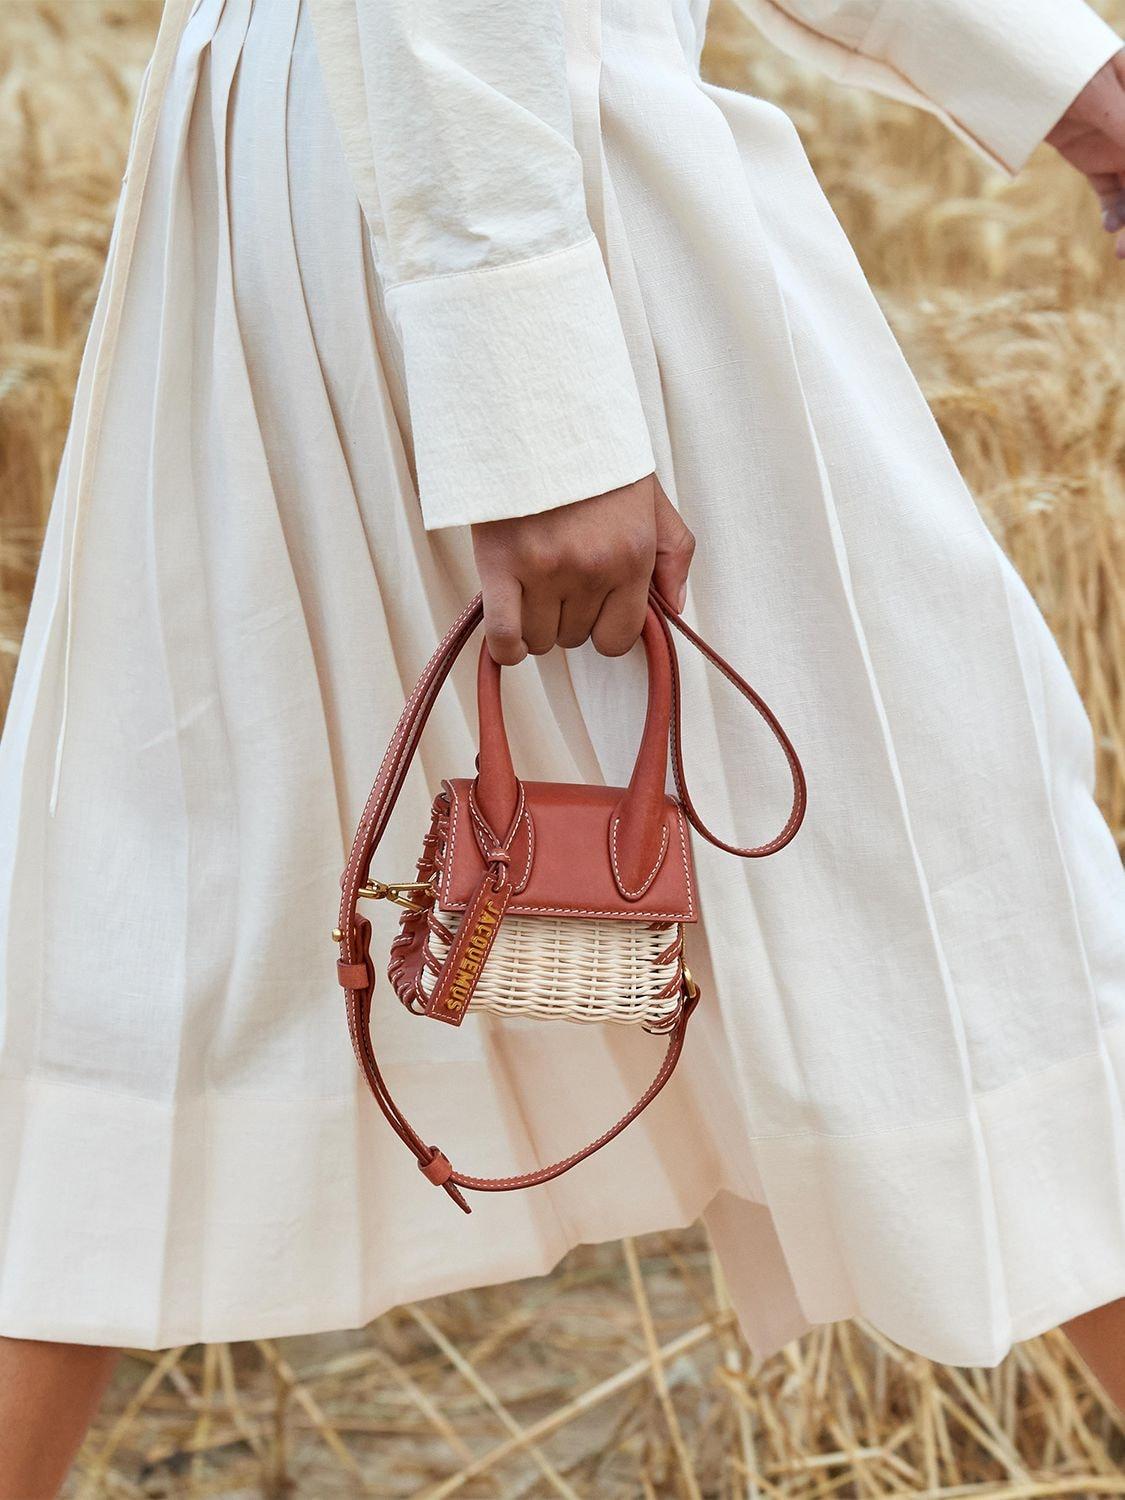 Why are all the It-girls Loving Jacquemus Le Chiquito Bag?